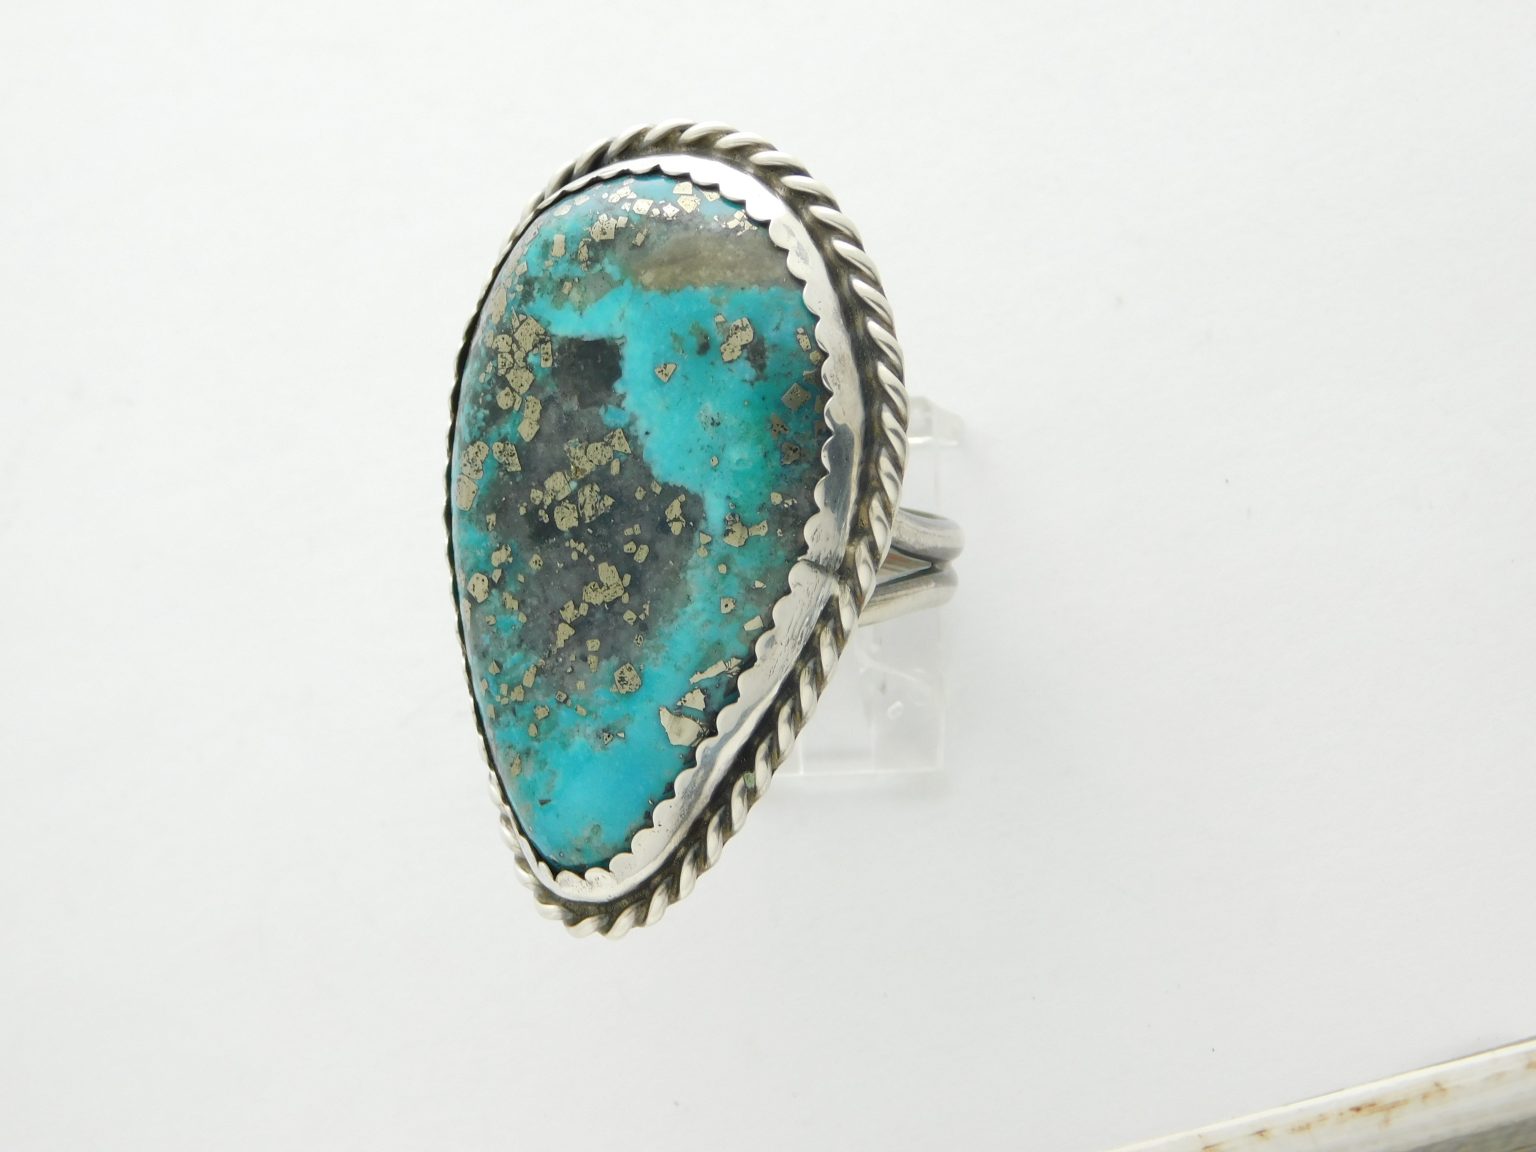 Kingman Turquoise with Pyrite Sterling Silver Ring